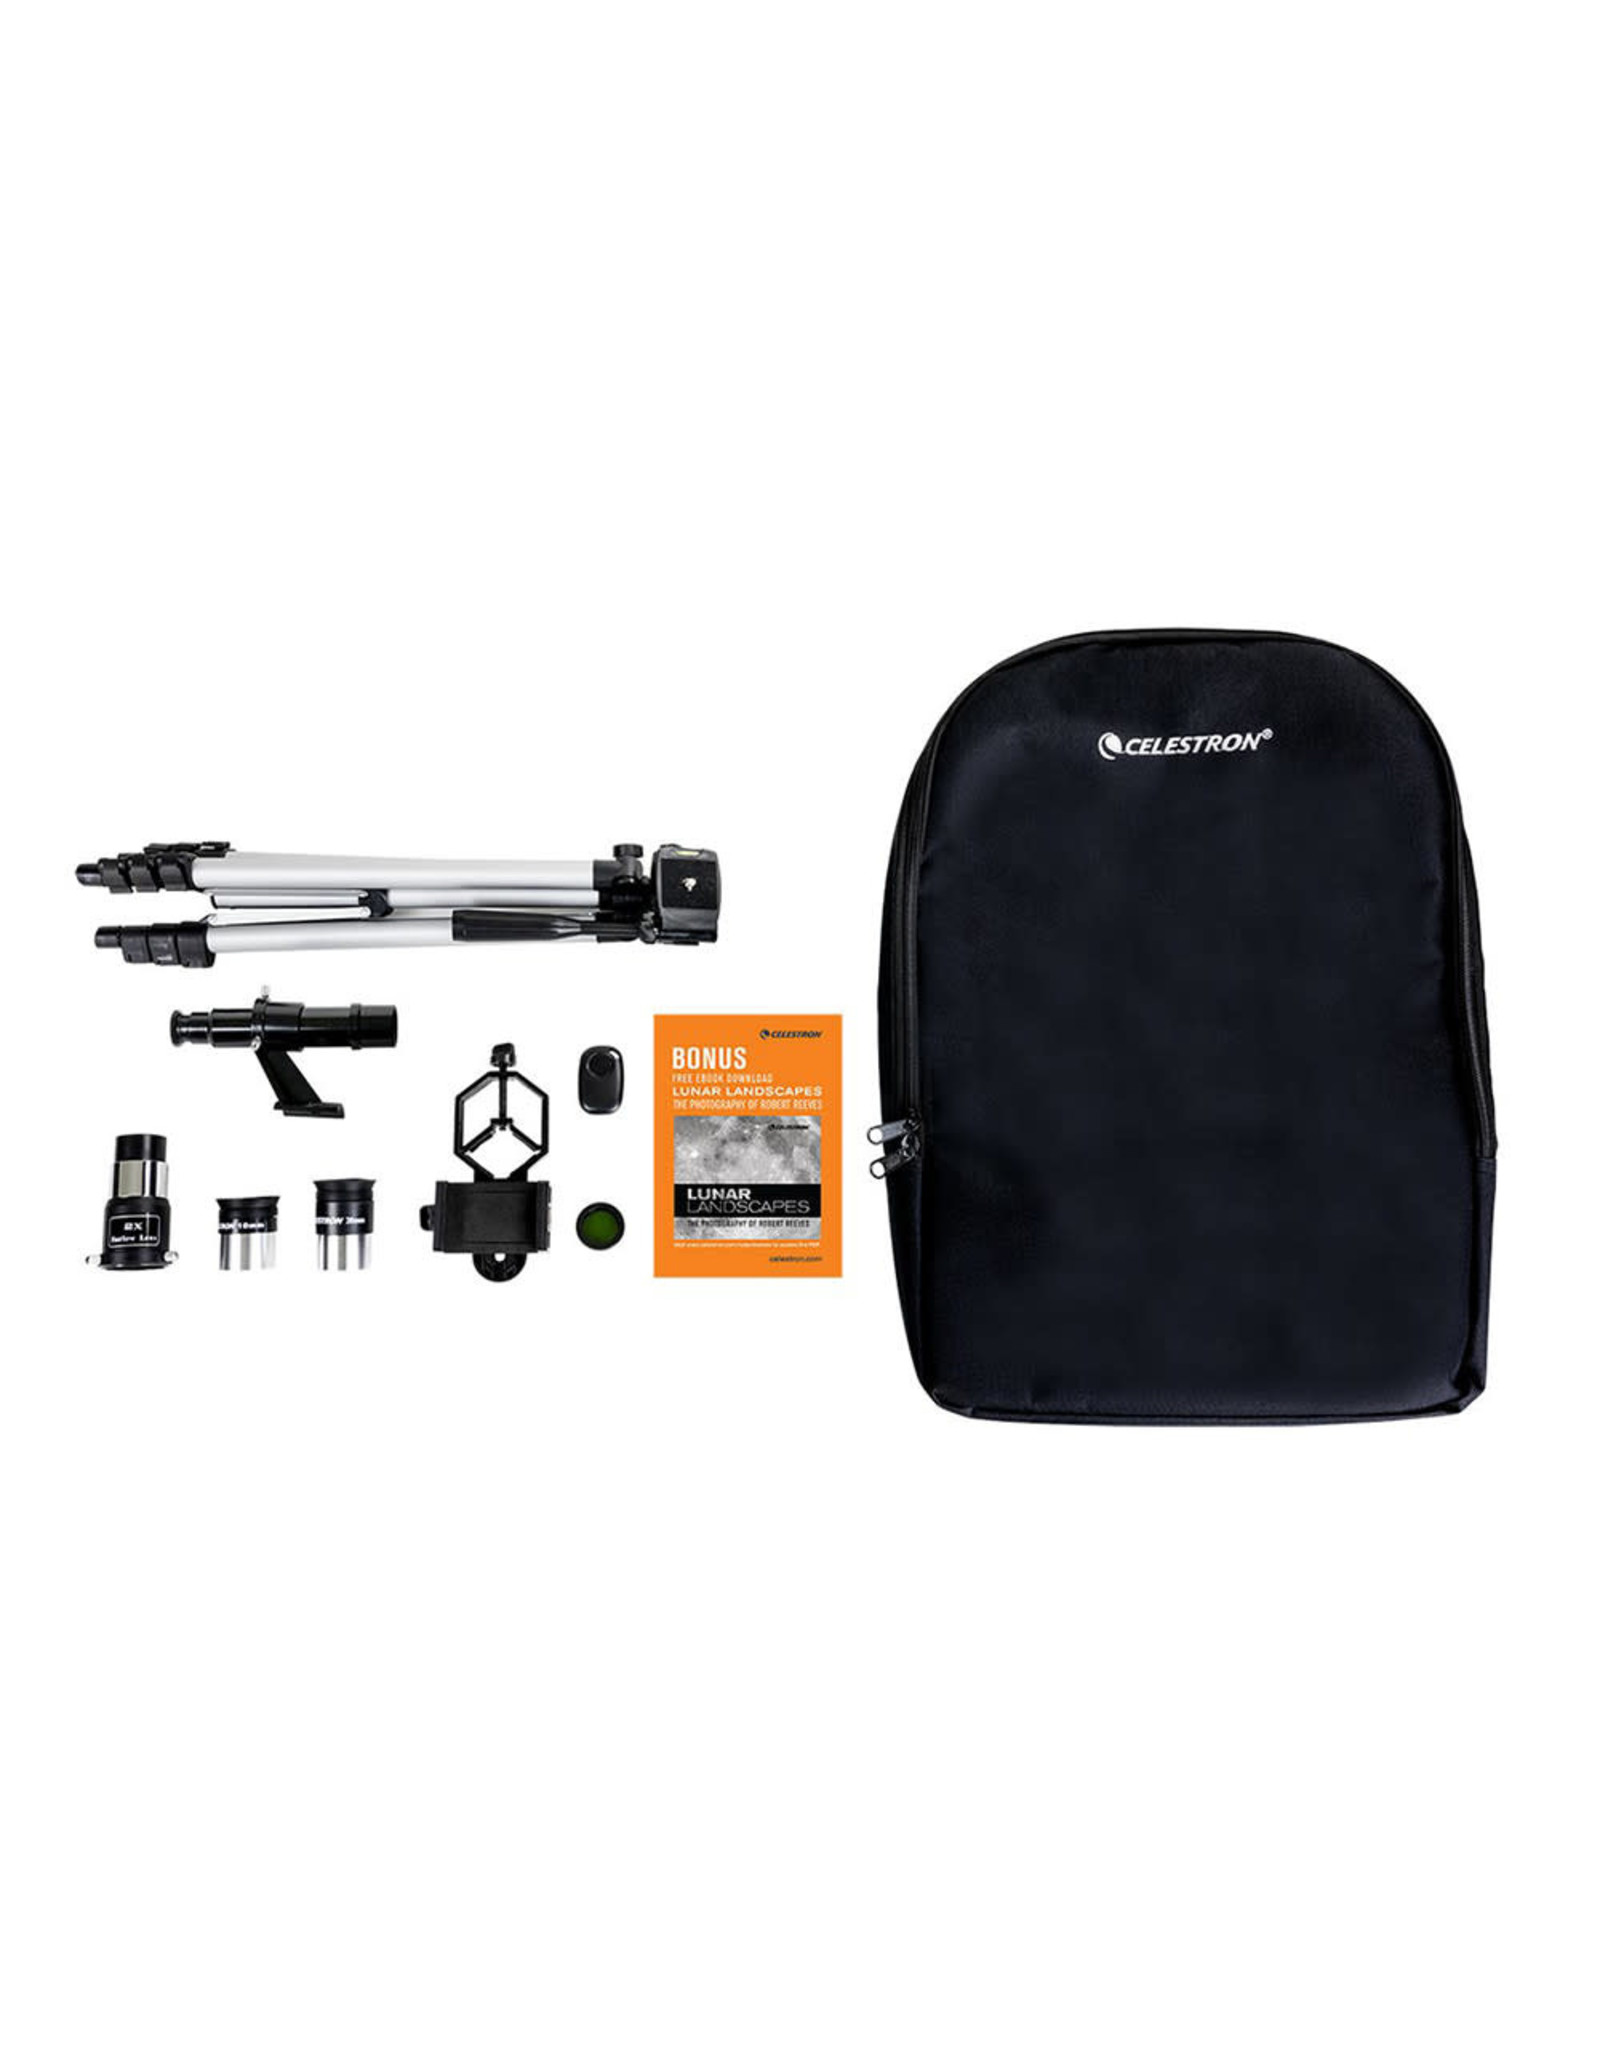 Celestron Travel Scope 70 DX with Backpack Camera